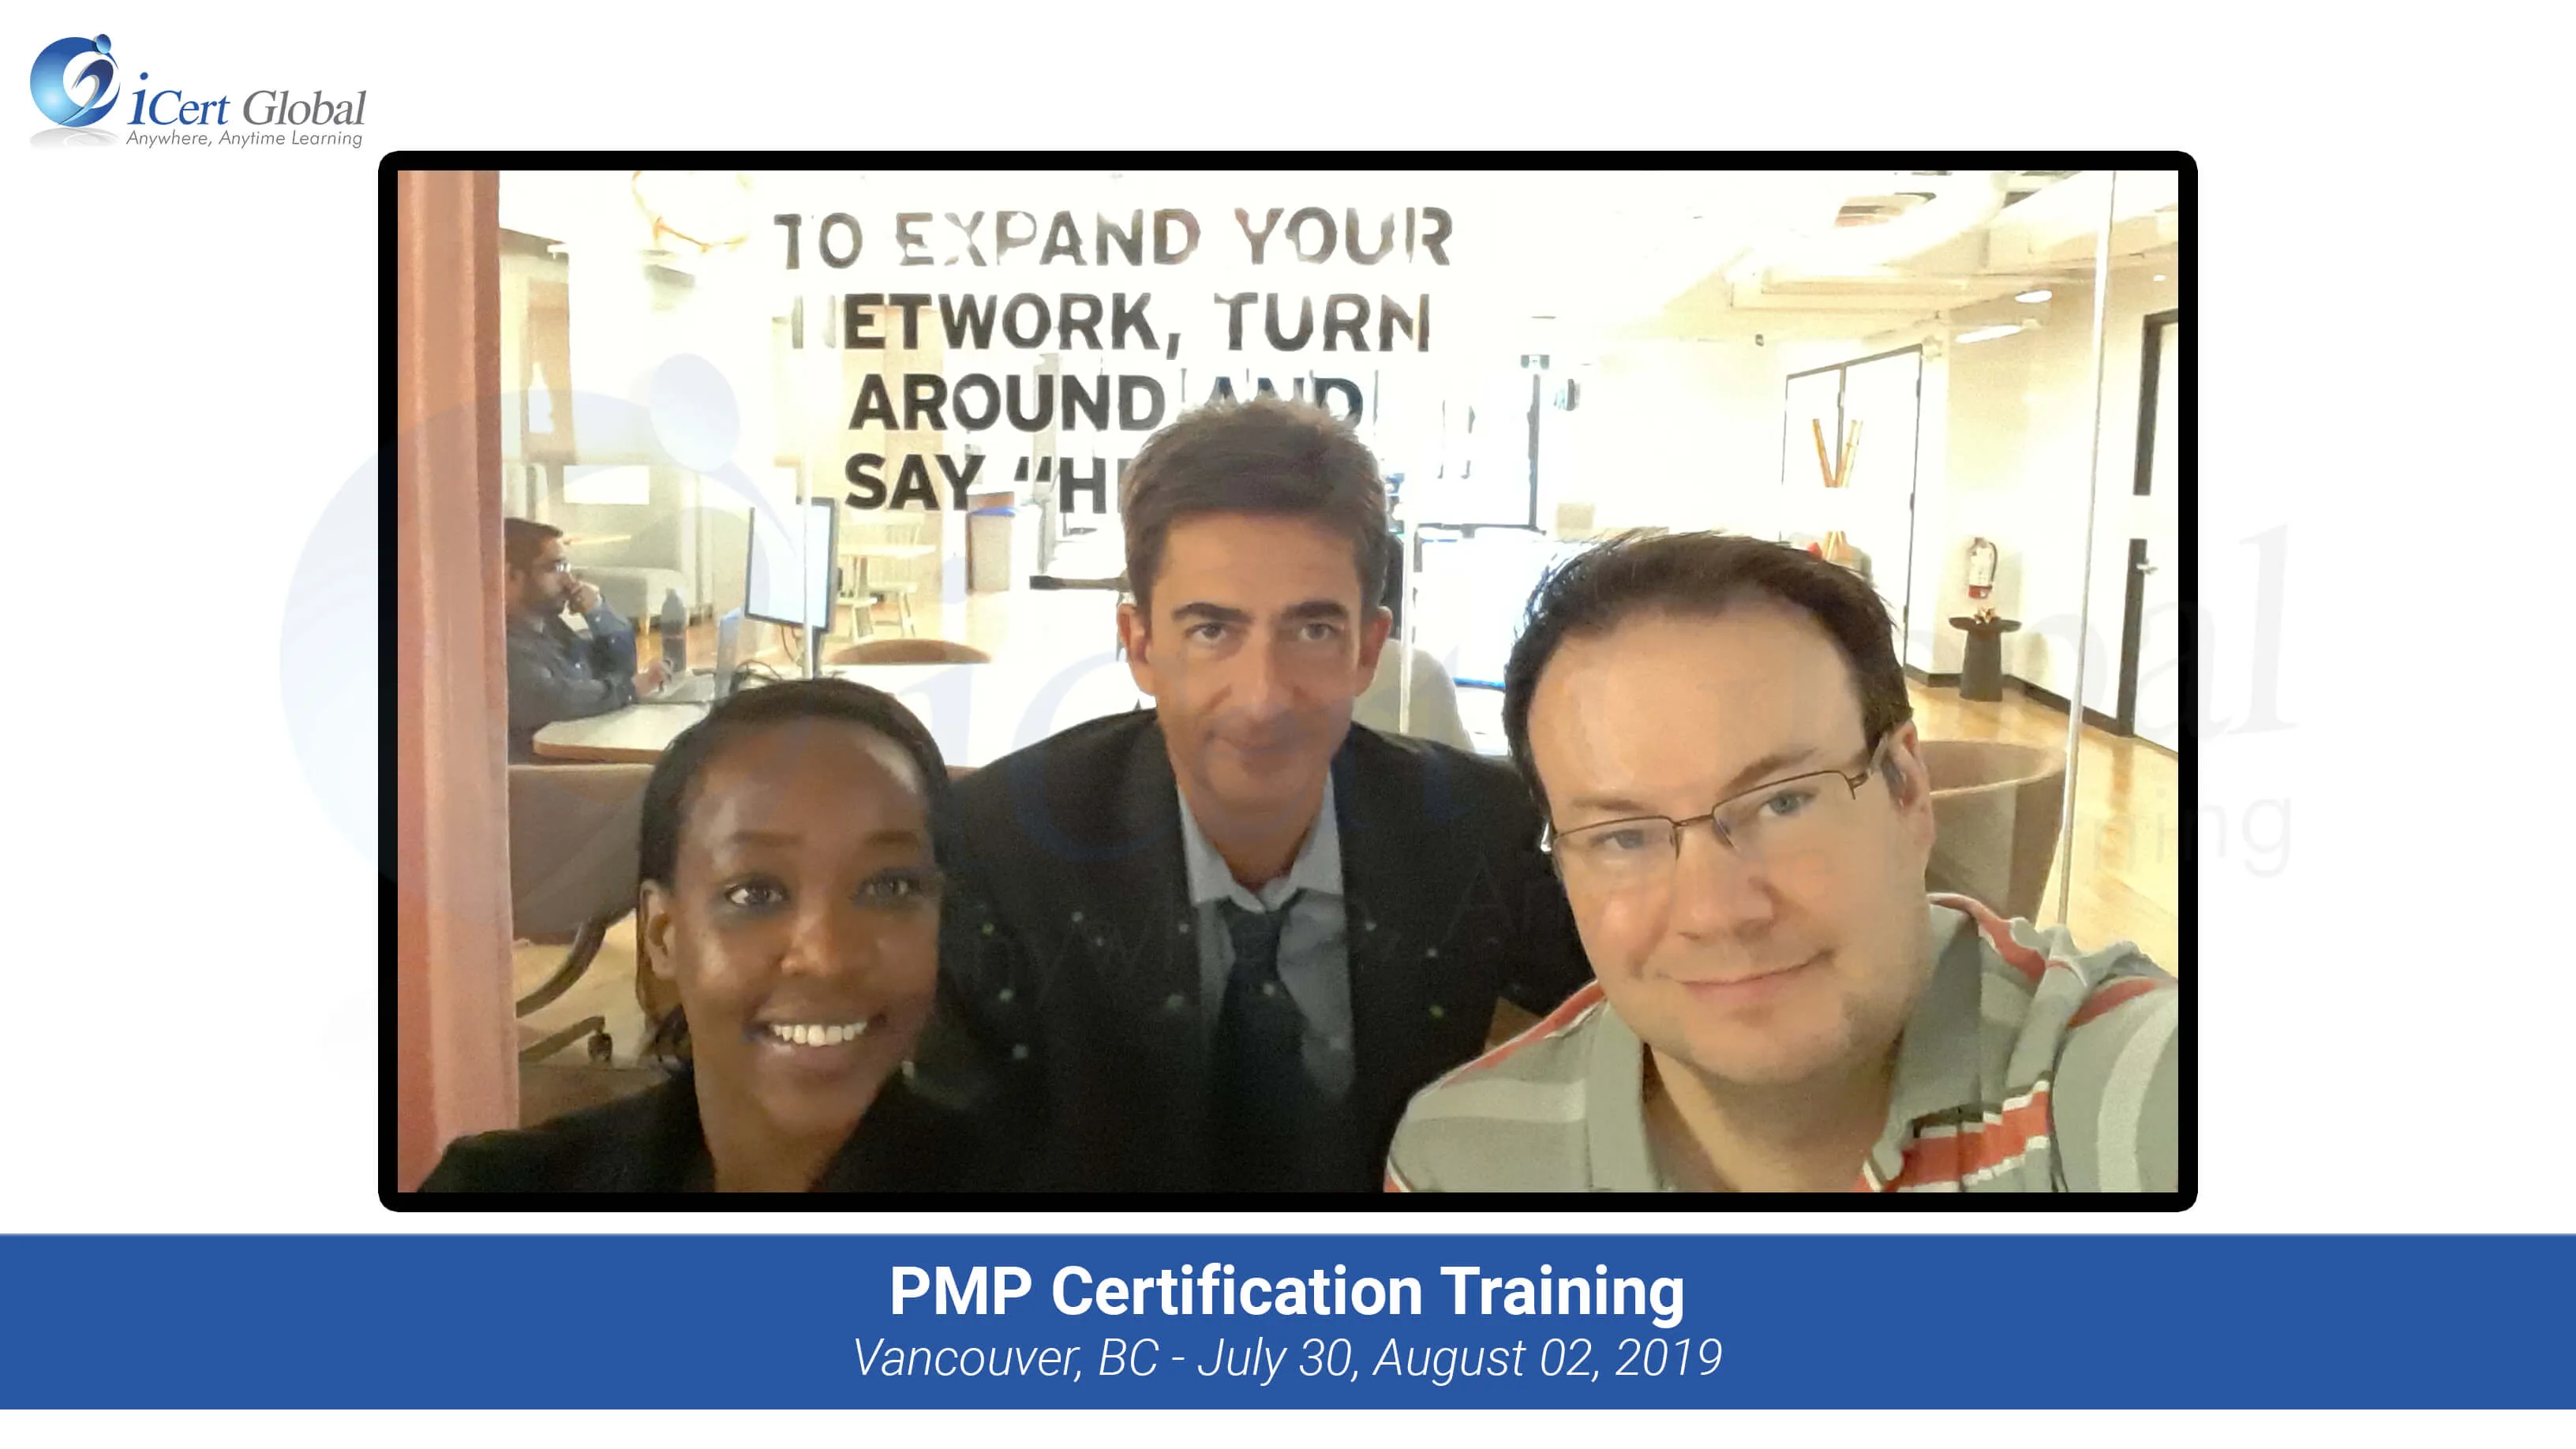 PMP Certification Training Course in Vancouver, BC, Canada from July 30 to August 02, 2019 